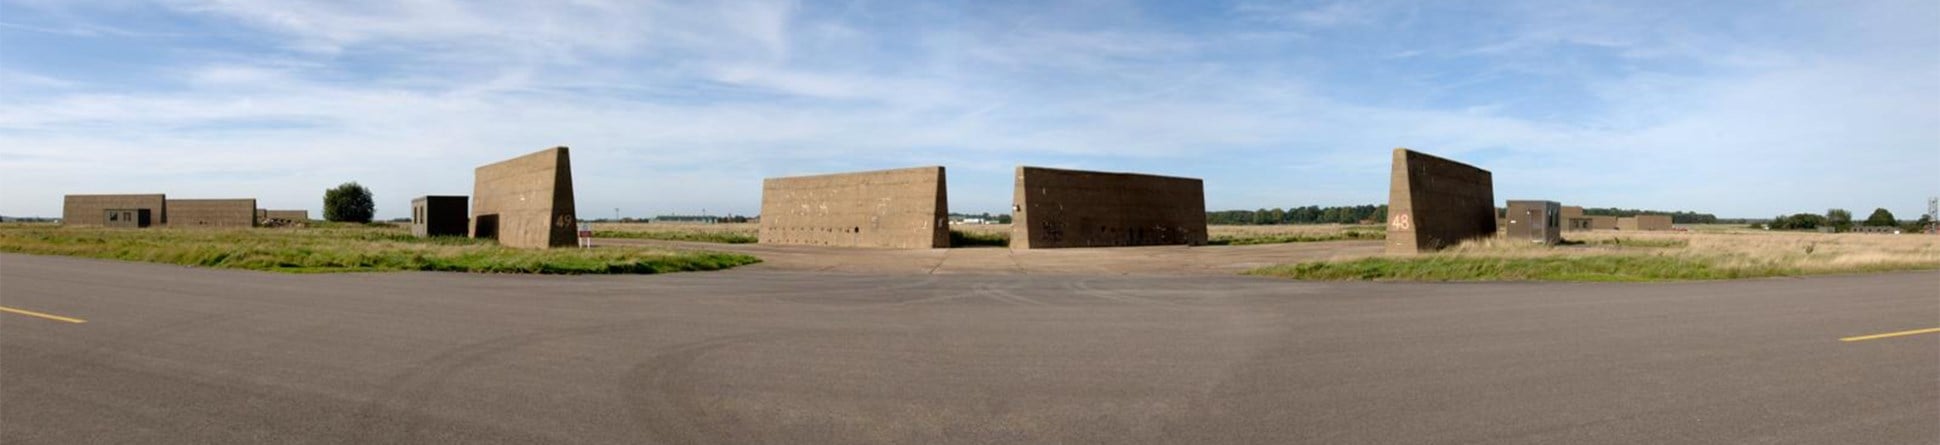 RAF Coltishall, Suffolk, mid 1950s concrete blast walls to protect aircraft from low level attacks